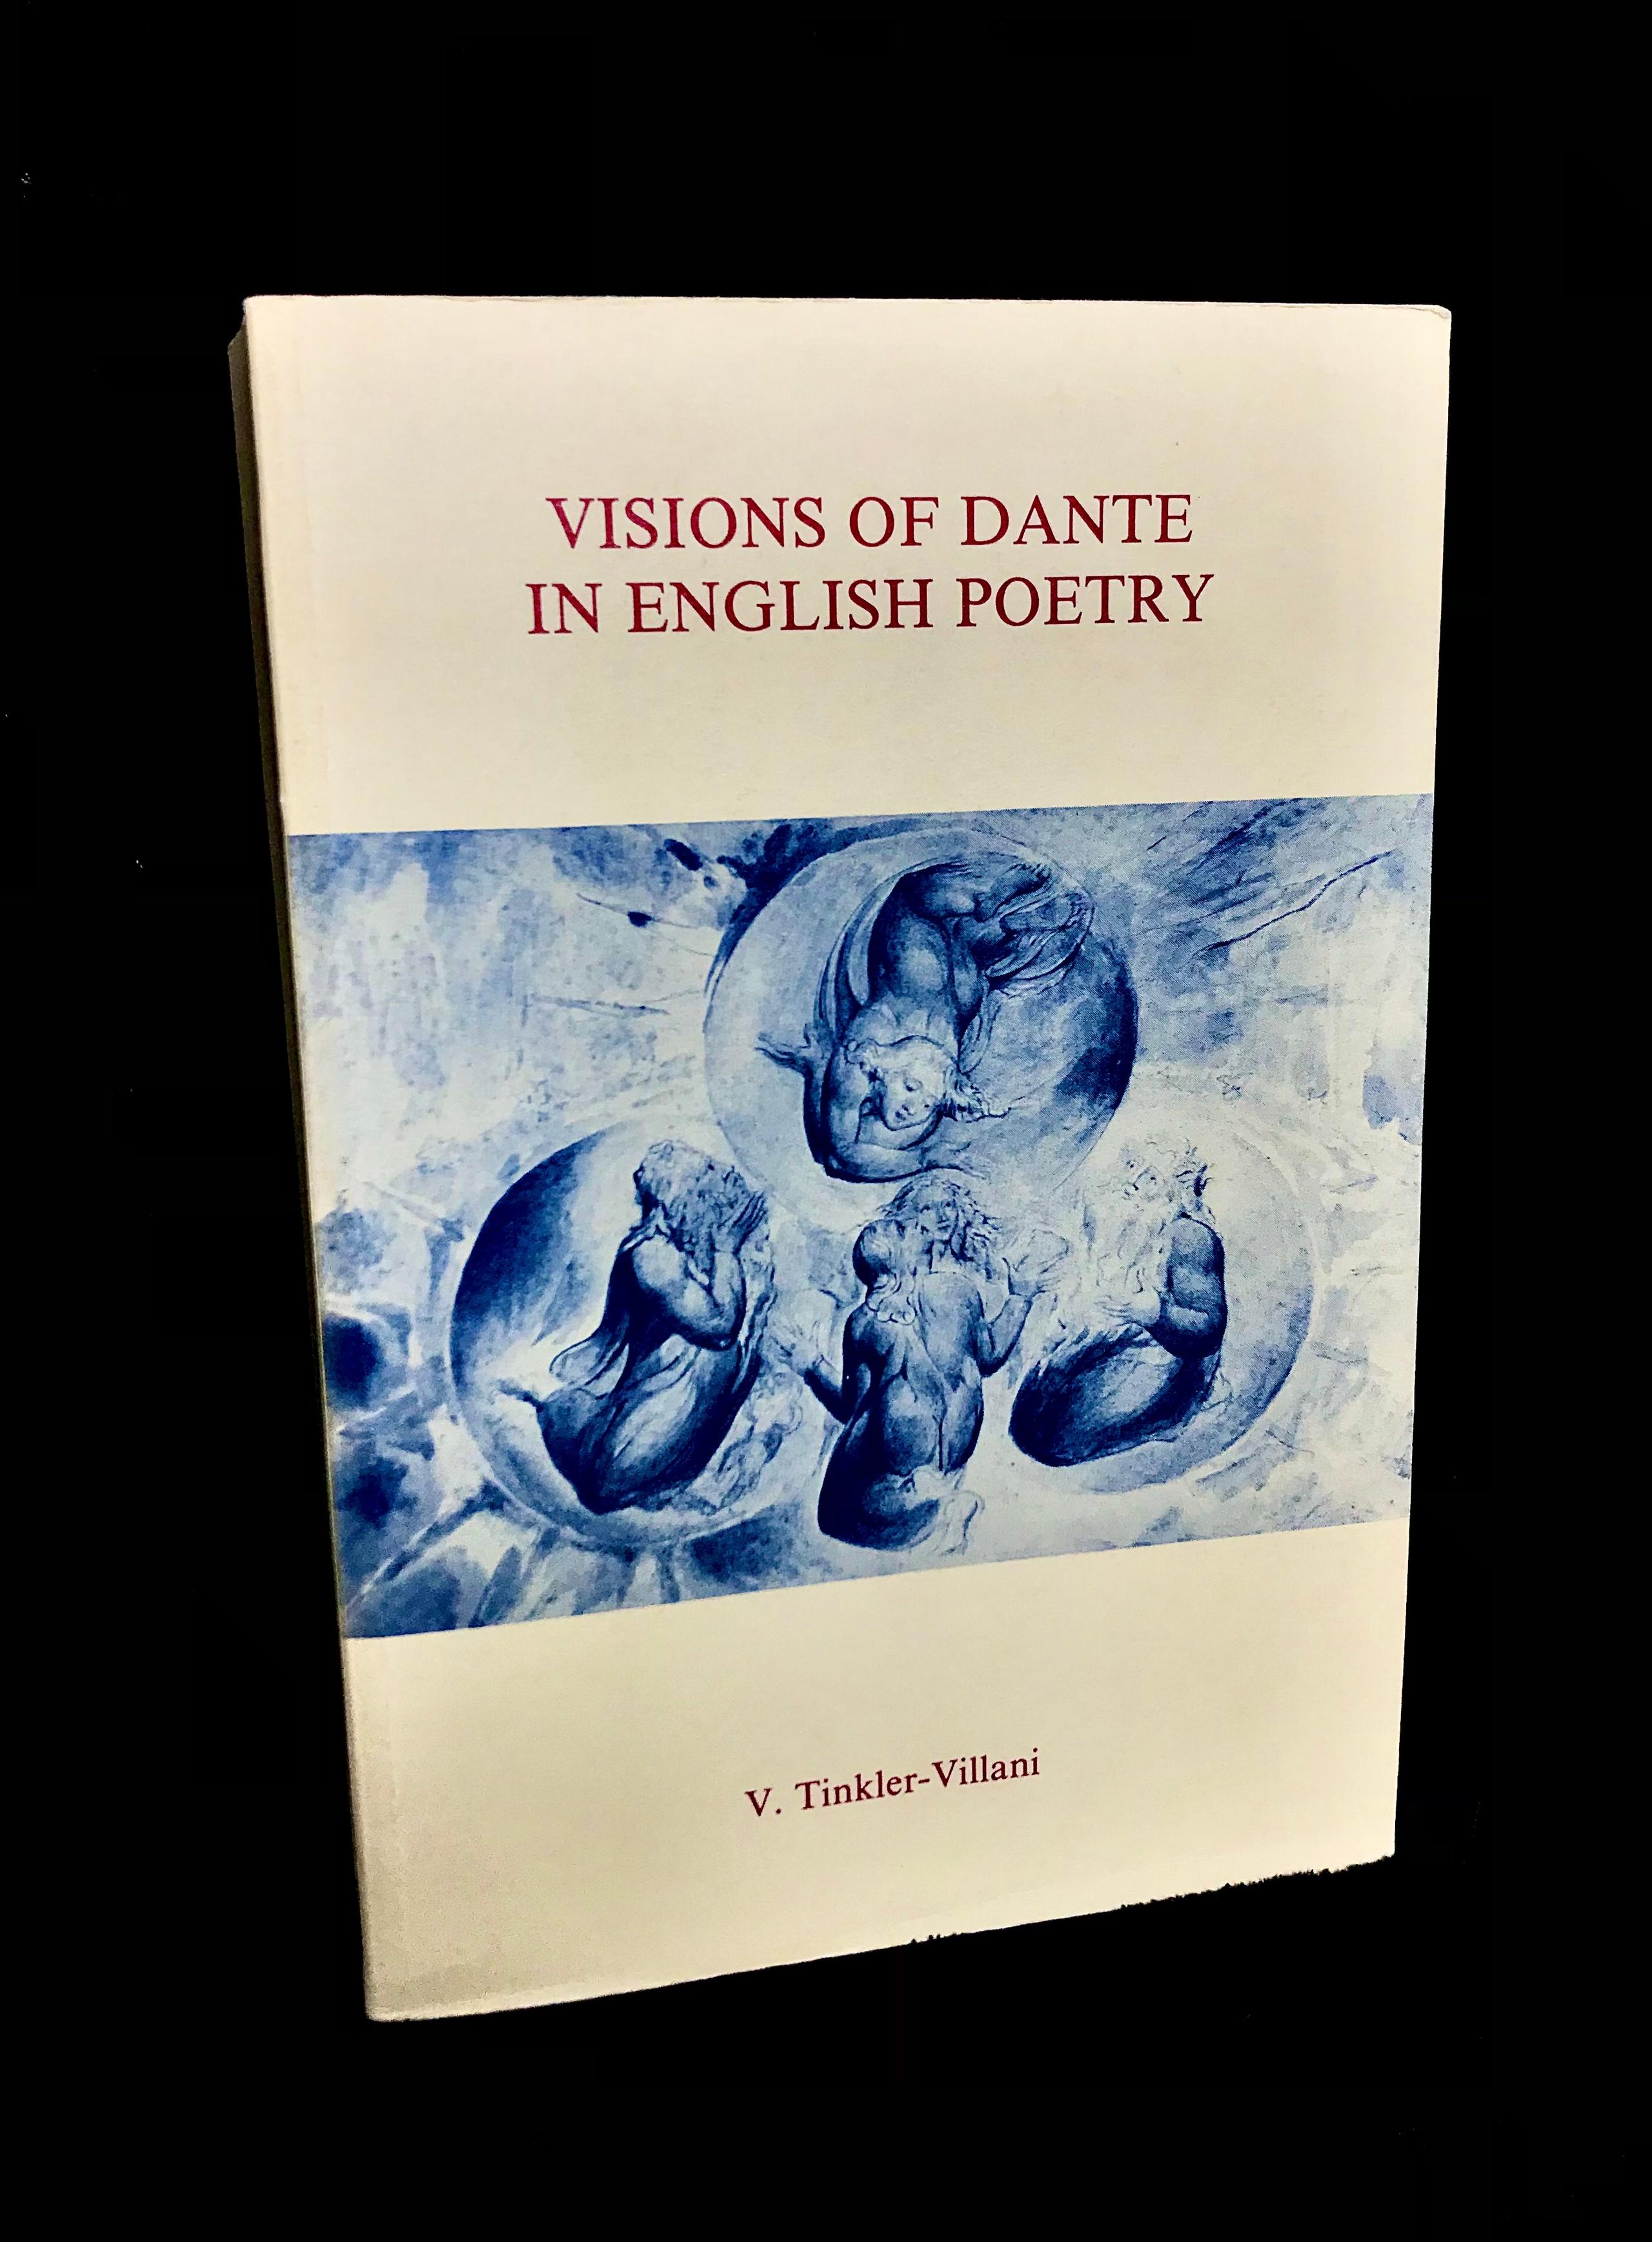 Visions Of Dante In English Poetry by V. Tinkler- Villani